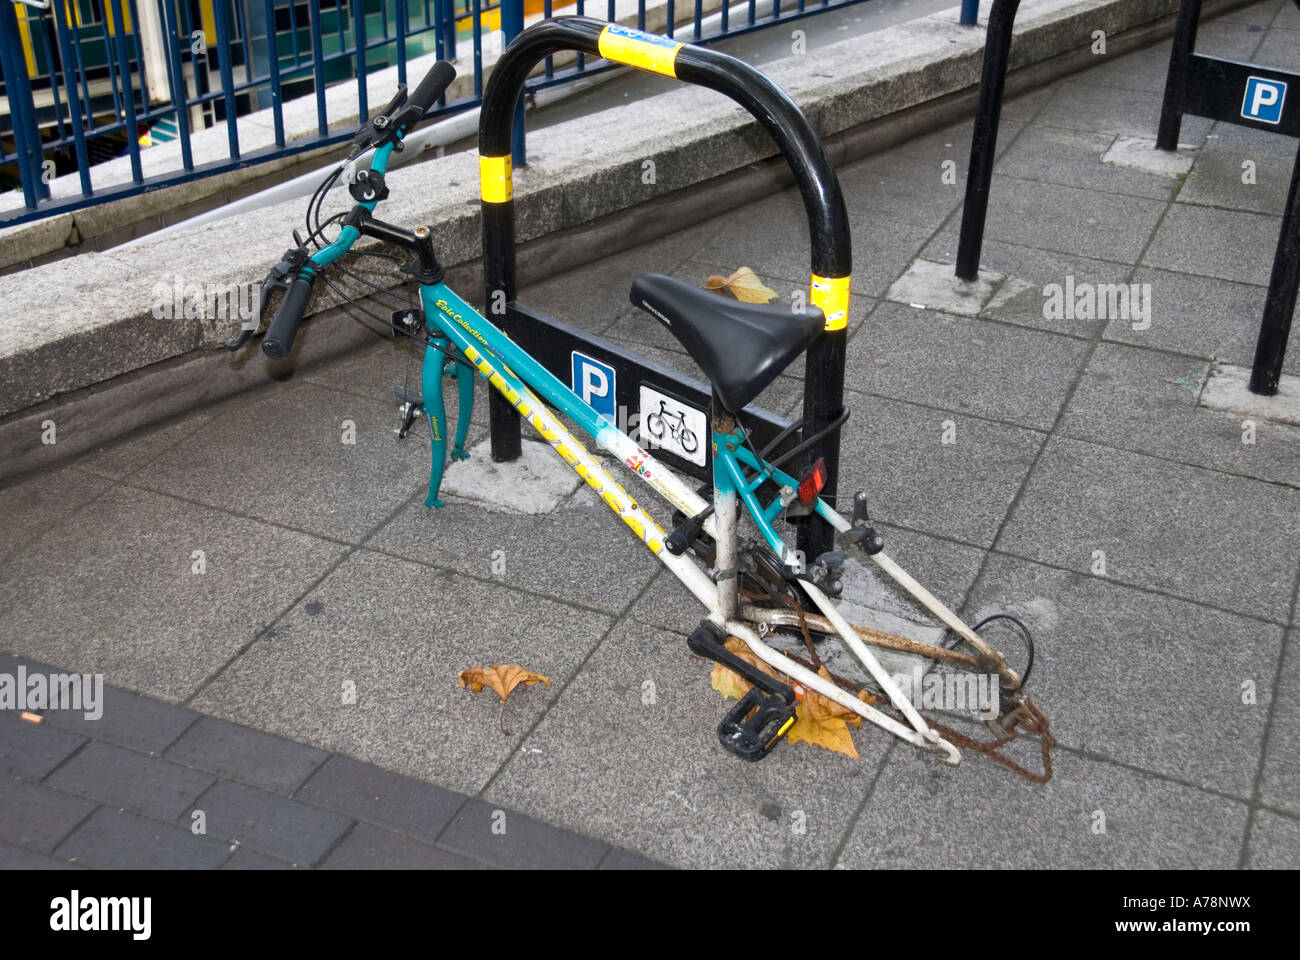 Elephant and Castle area of South London remains of vandalised bike with only main frame padlocked to official parking place Stock Photo